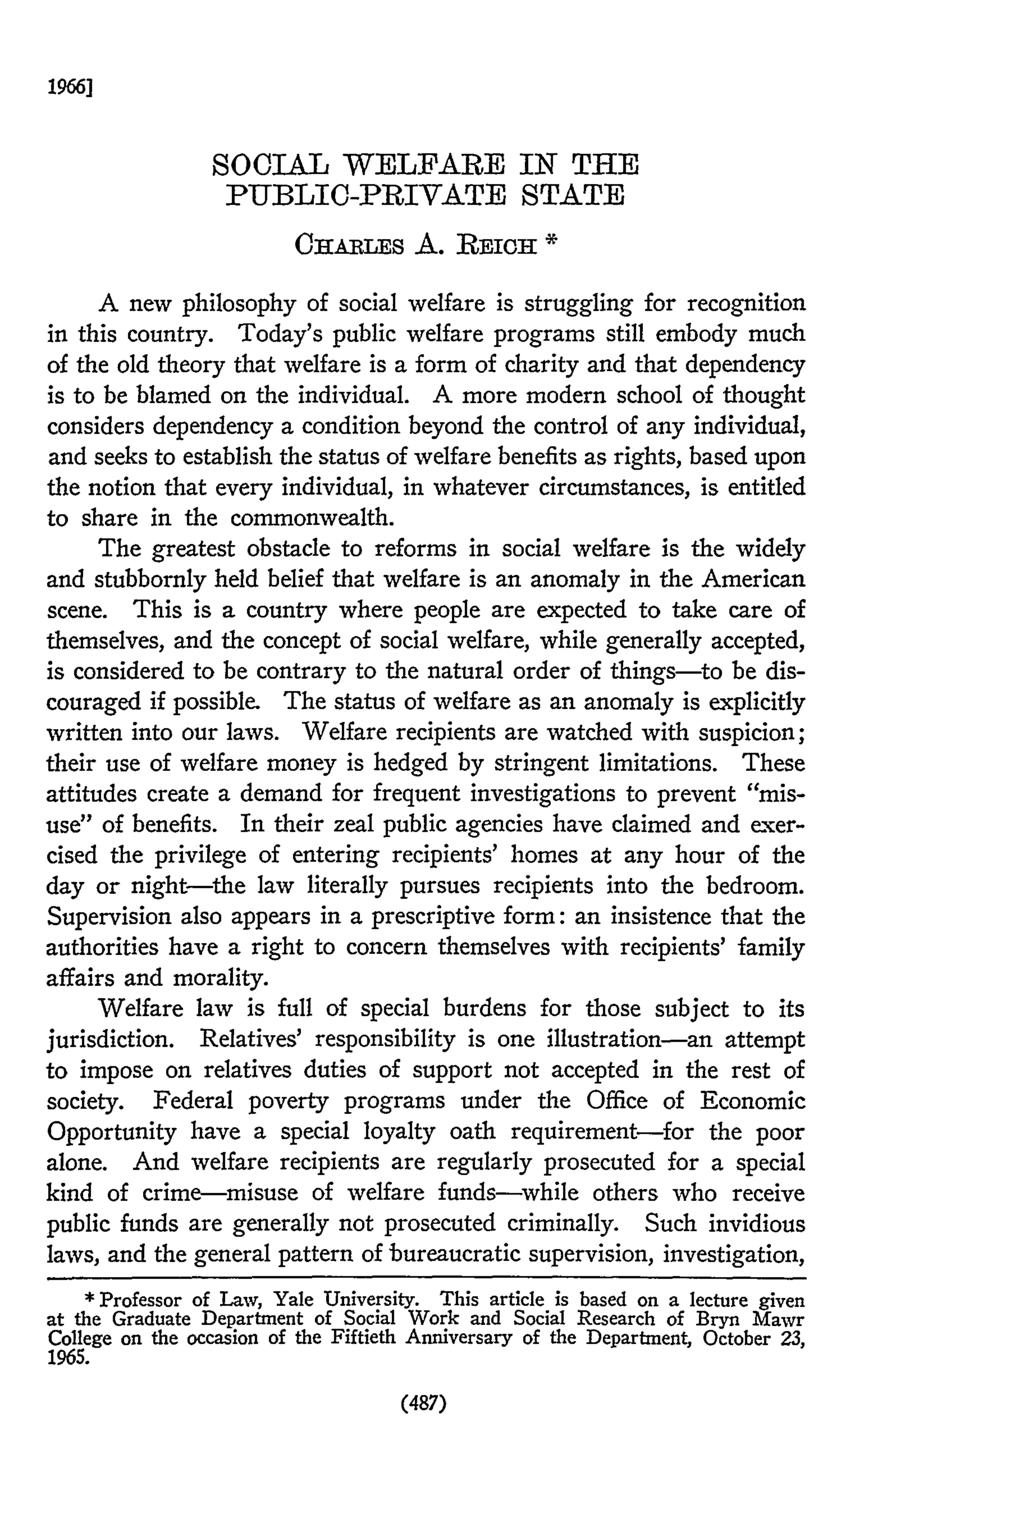 SOCIAL WELFARE IN THE PUBLIC-PRIVATE STATE CBRALu s A. IREICI * A new philosophy of social welfare is struggling for recognition in this country.